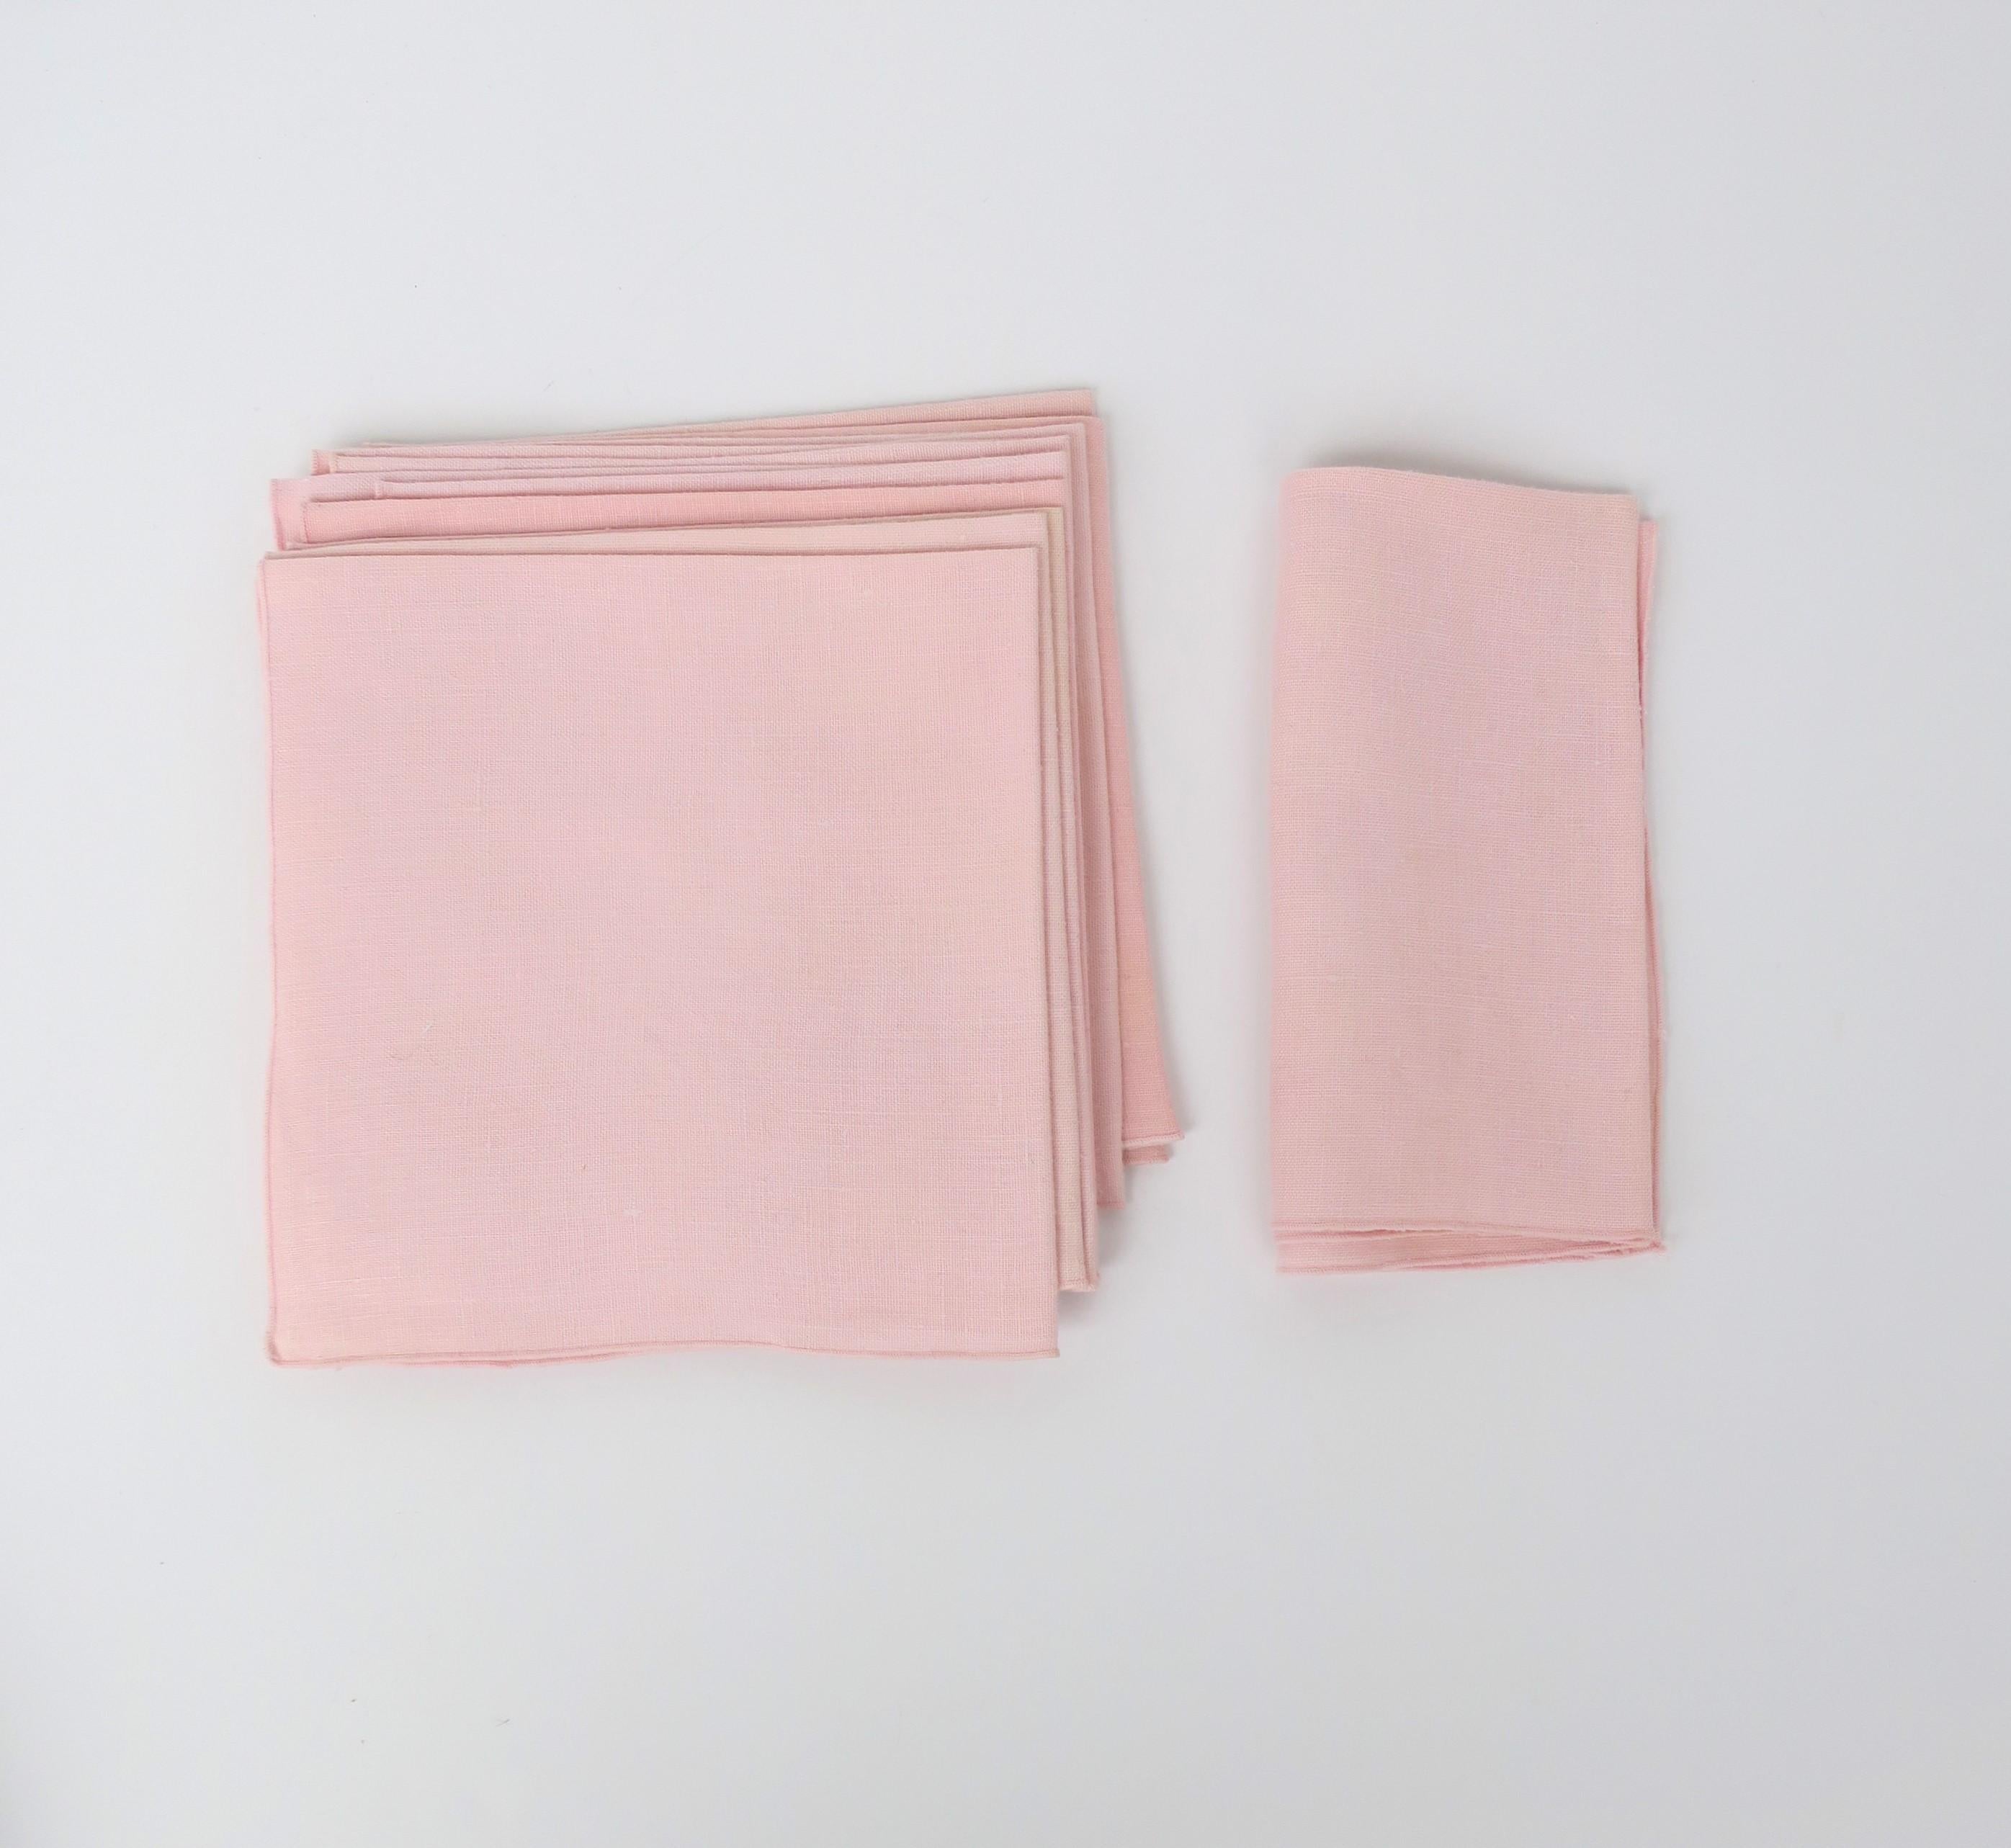 A beautiful set of ten (10) fine pink linen dinner napkins, circa 20th century. Napkins are solid pink. A great set for indoor or outdoor dining including picnic, patio, pool, garden, dining room, etc., breakfast, lunch, dinner. A great addition to